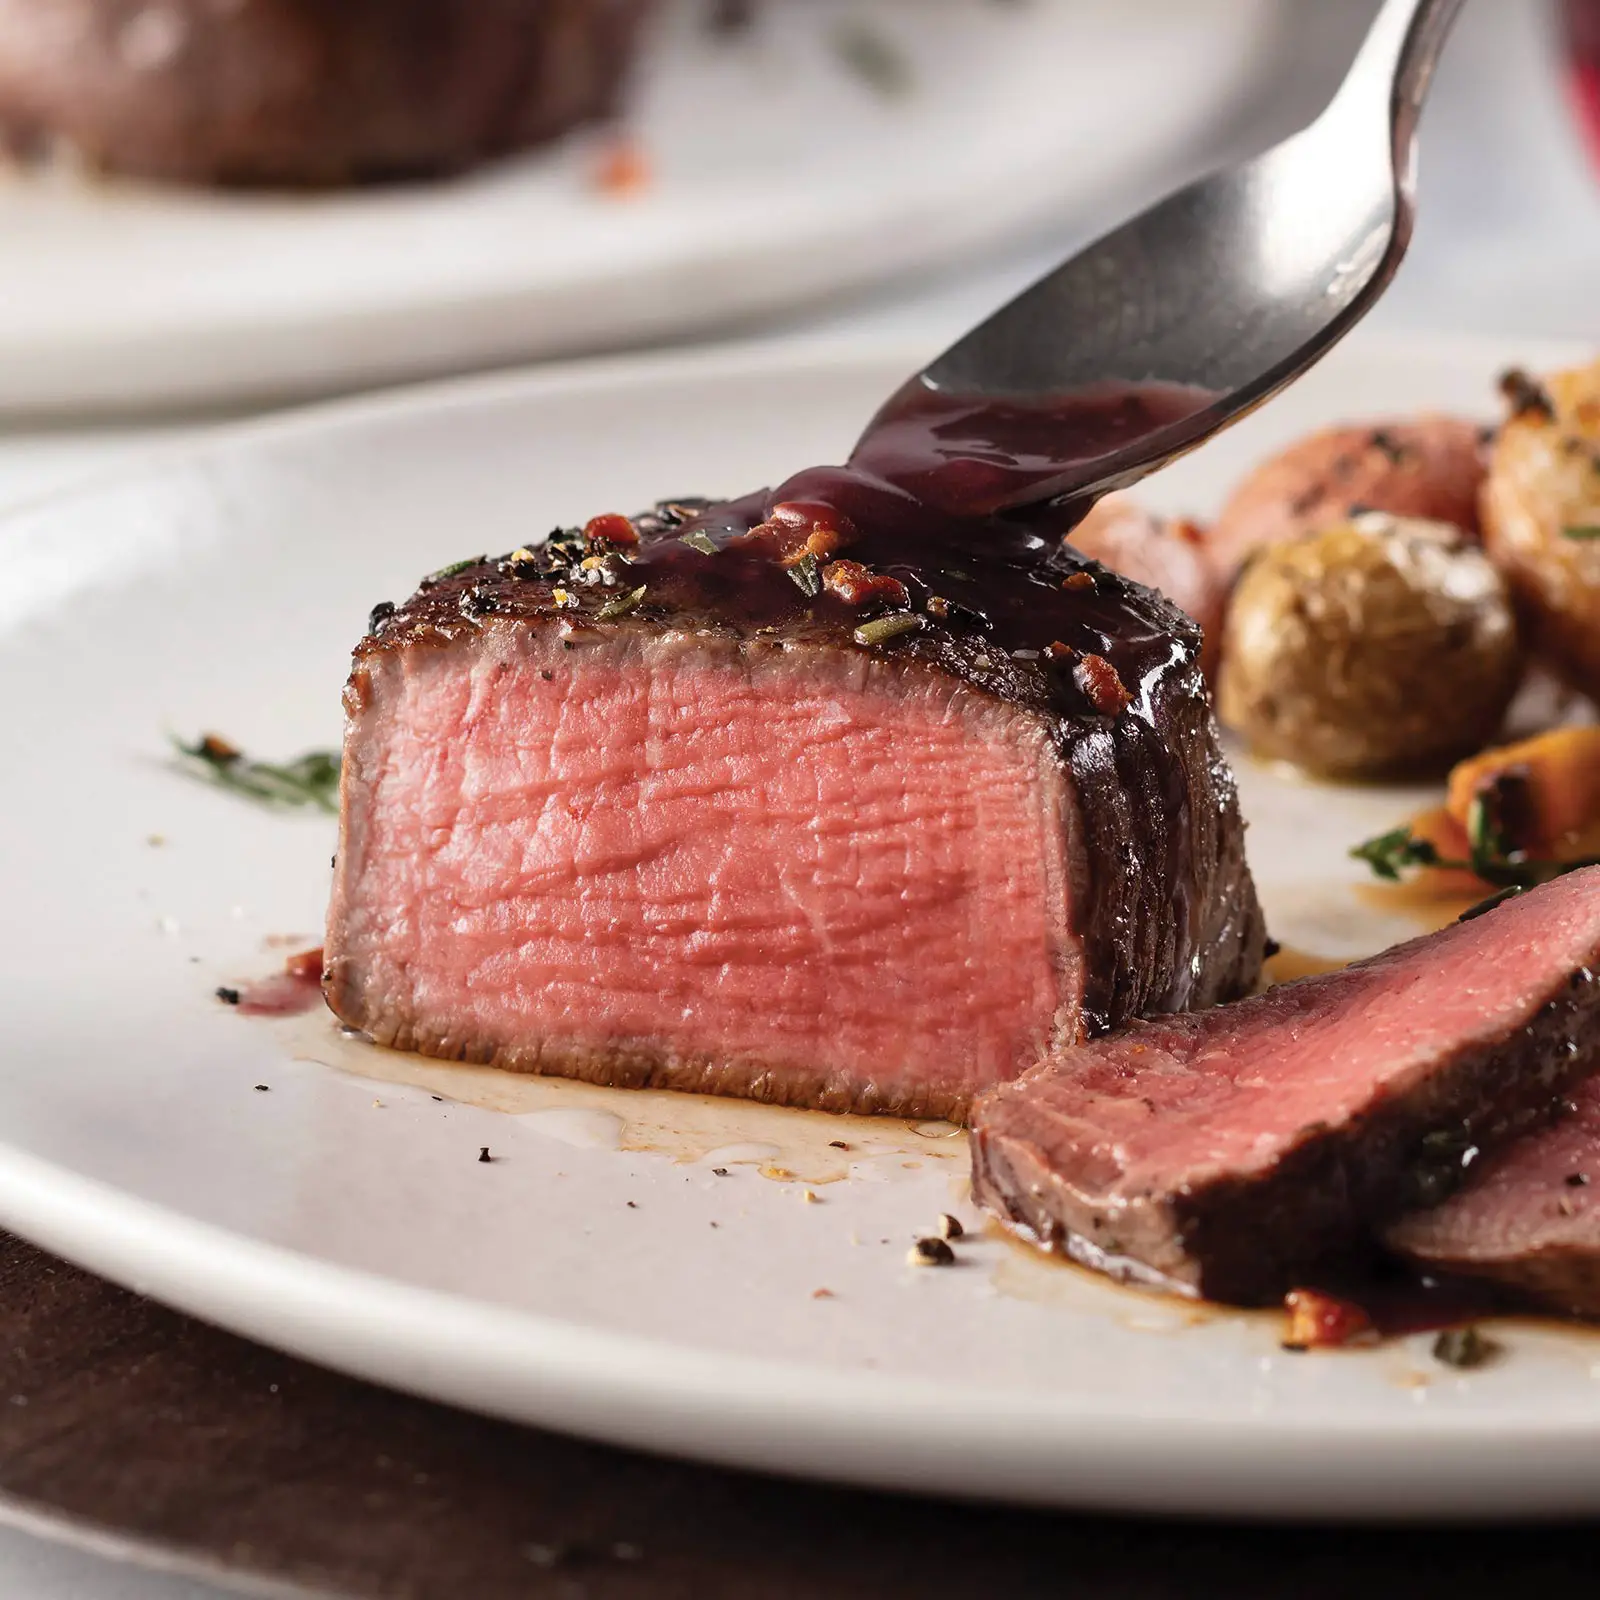 Omaha Steaks: An exclusive deal for listening to I